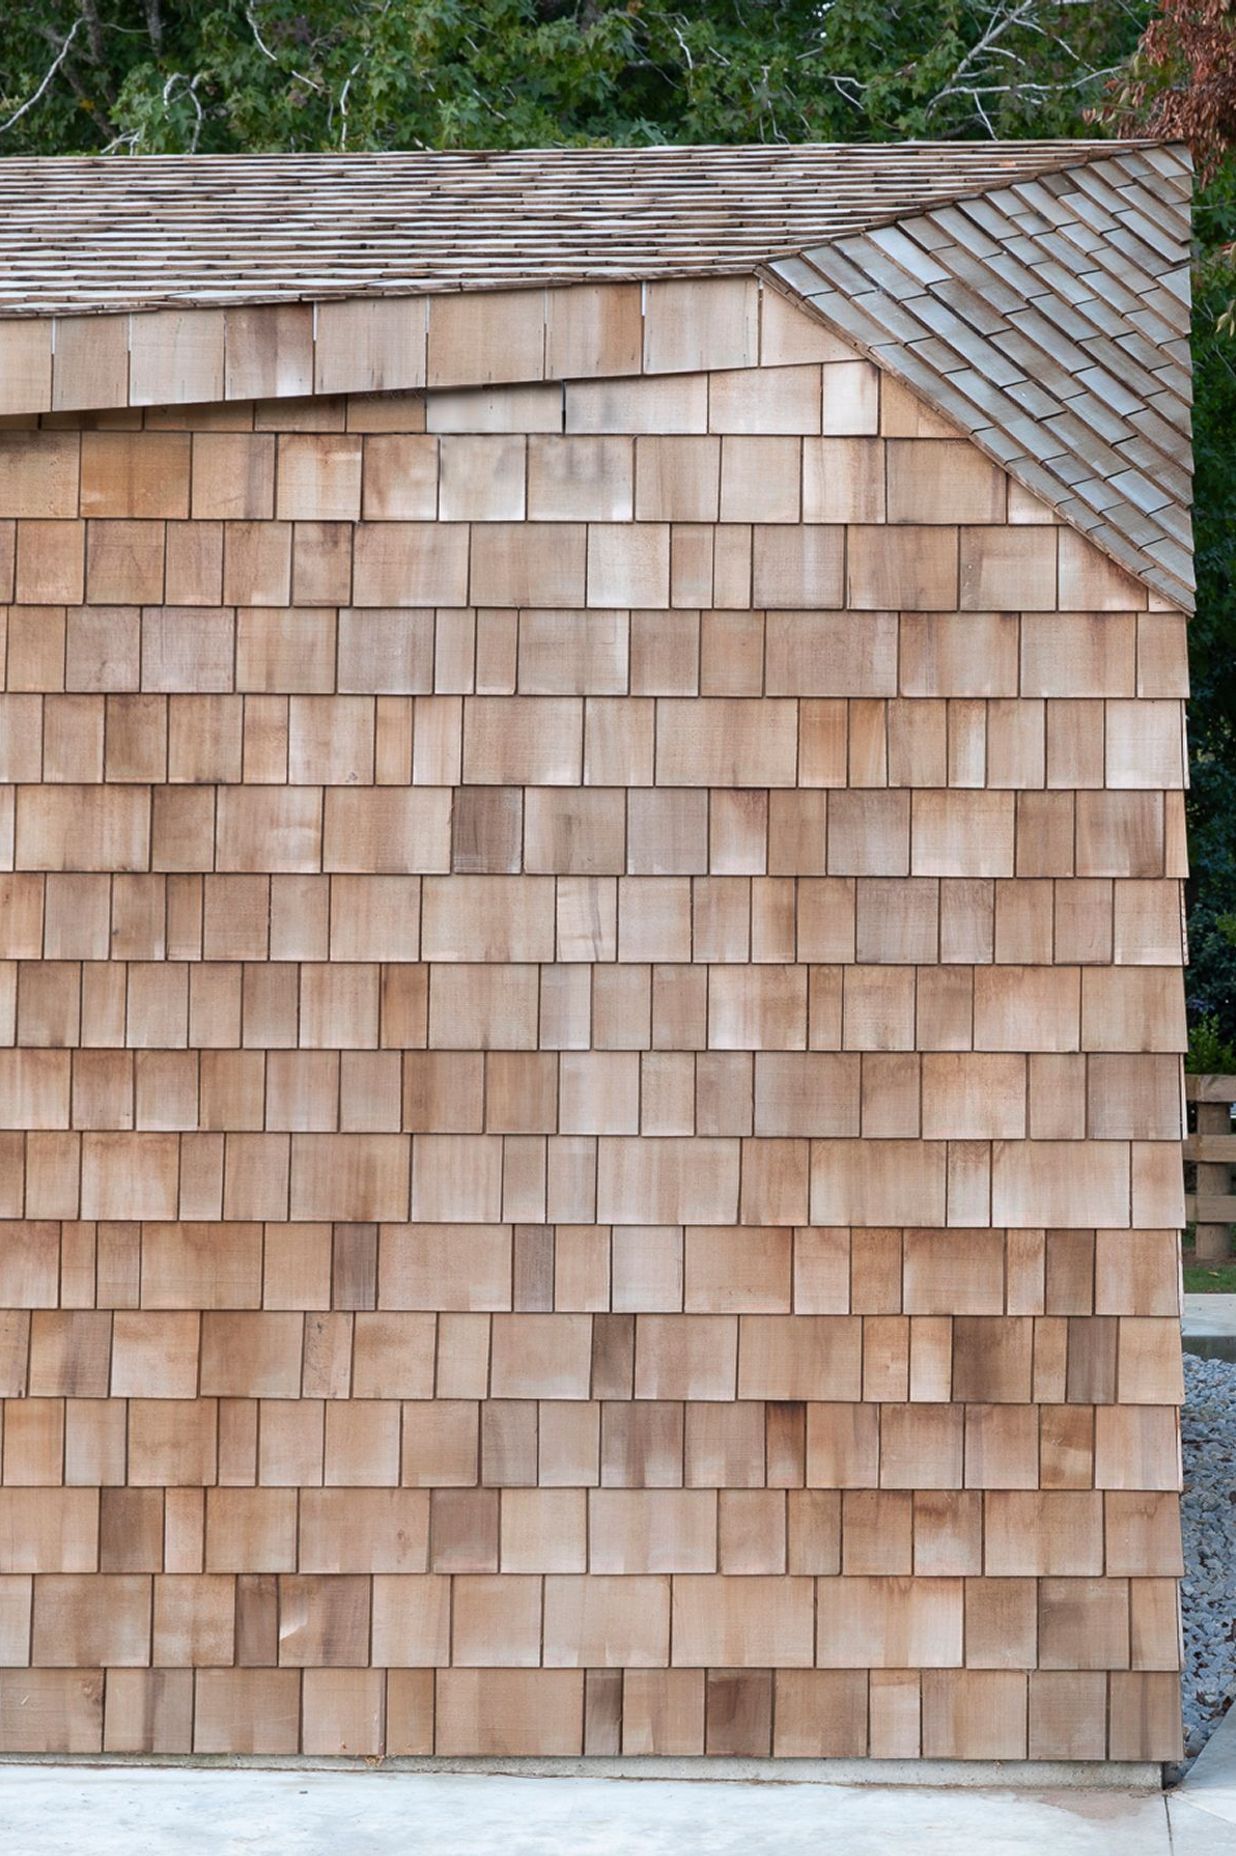 Cedar shingles add texture and warmth to the sharp sculptural form of the garage.